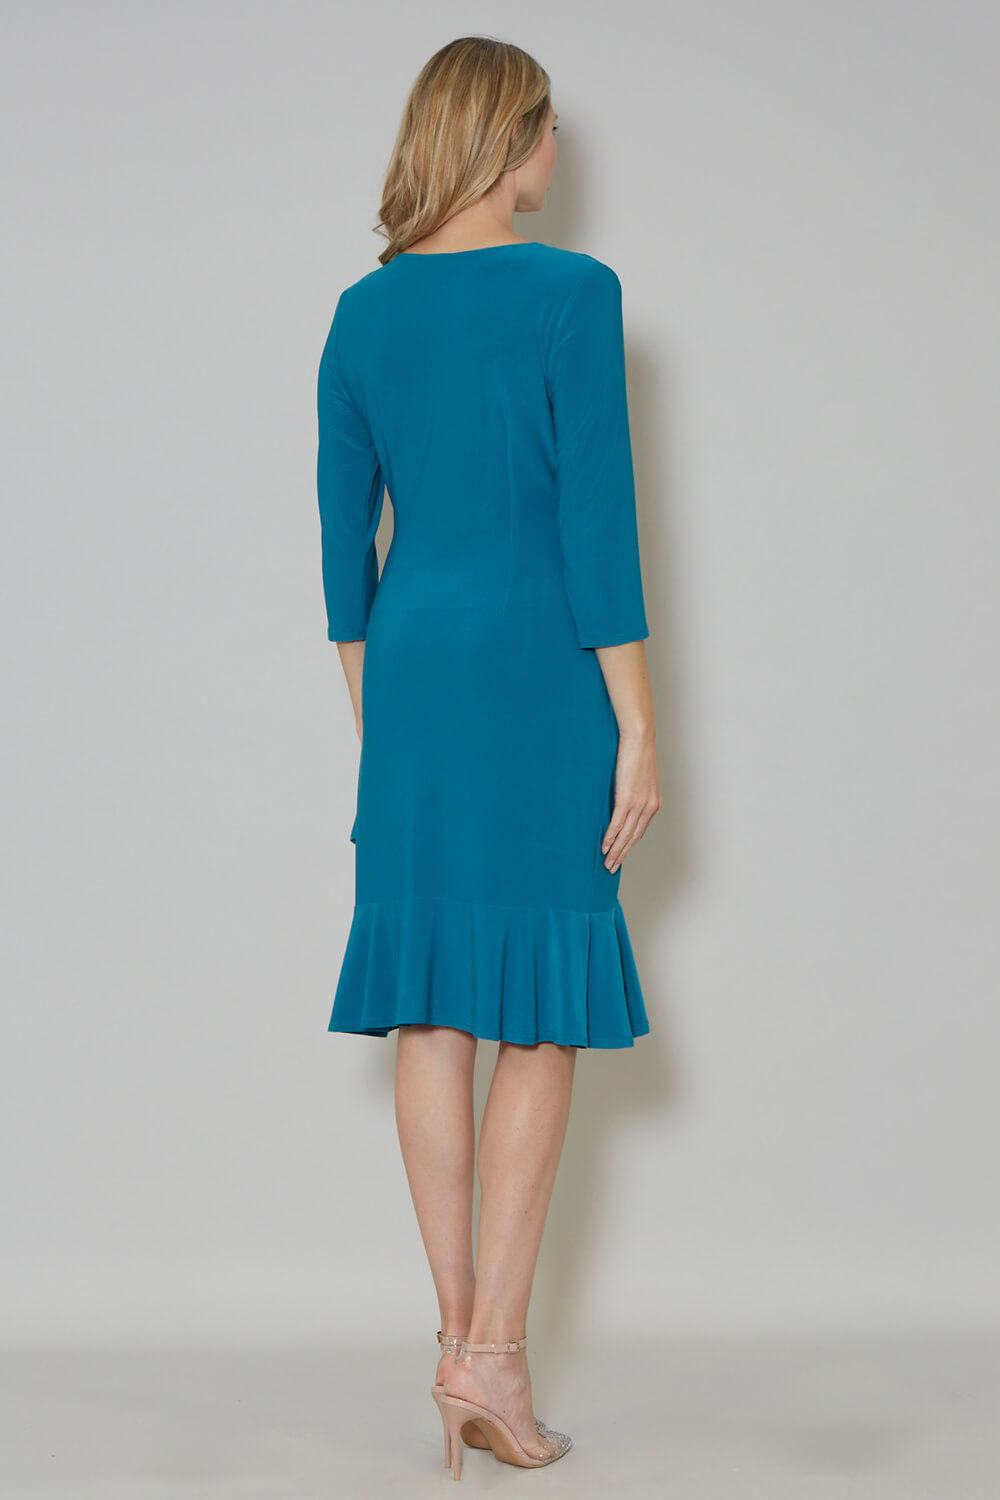 Teal Julianna Ruched Side Wrap Dress, Image 2 of 3